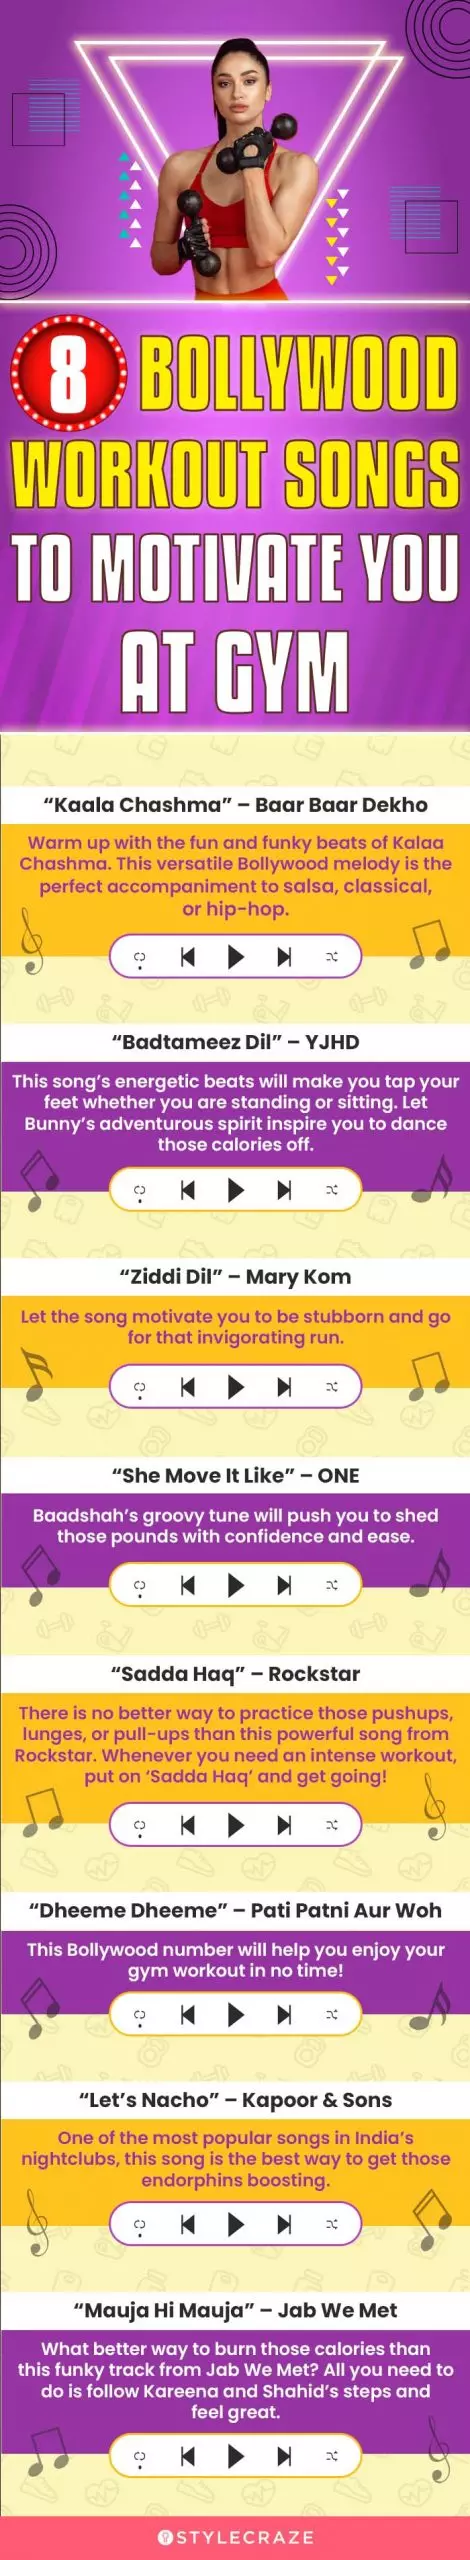 8 bollywood workout songs to motivate you at gym (infographic)